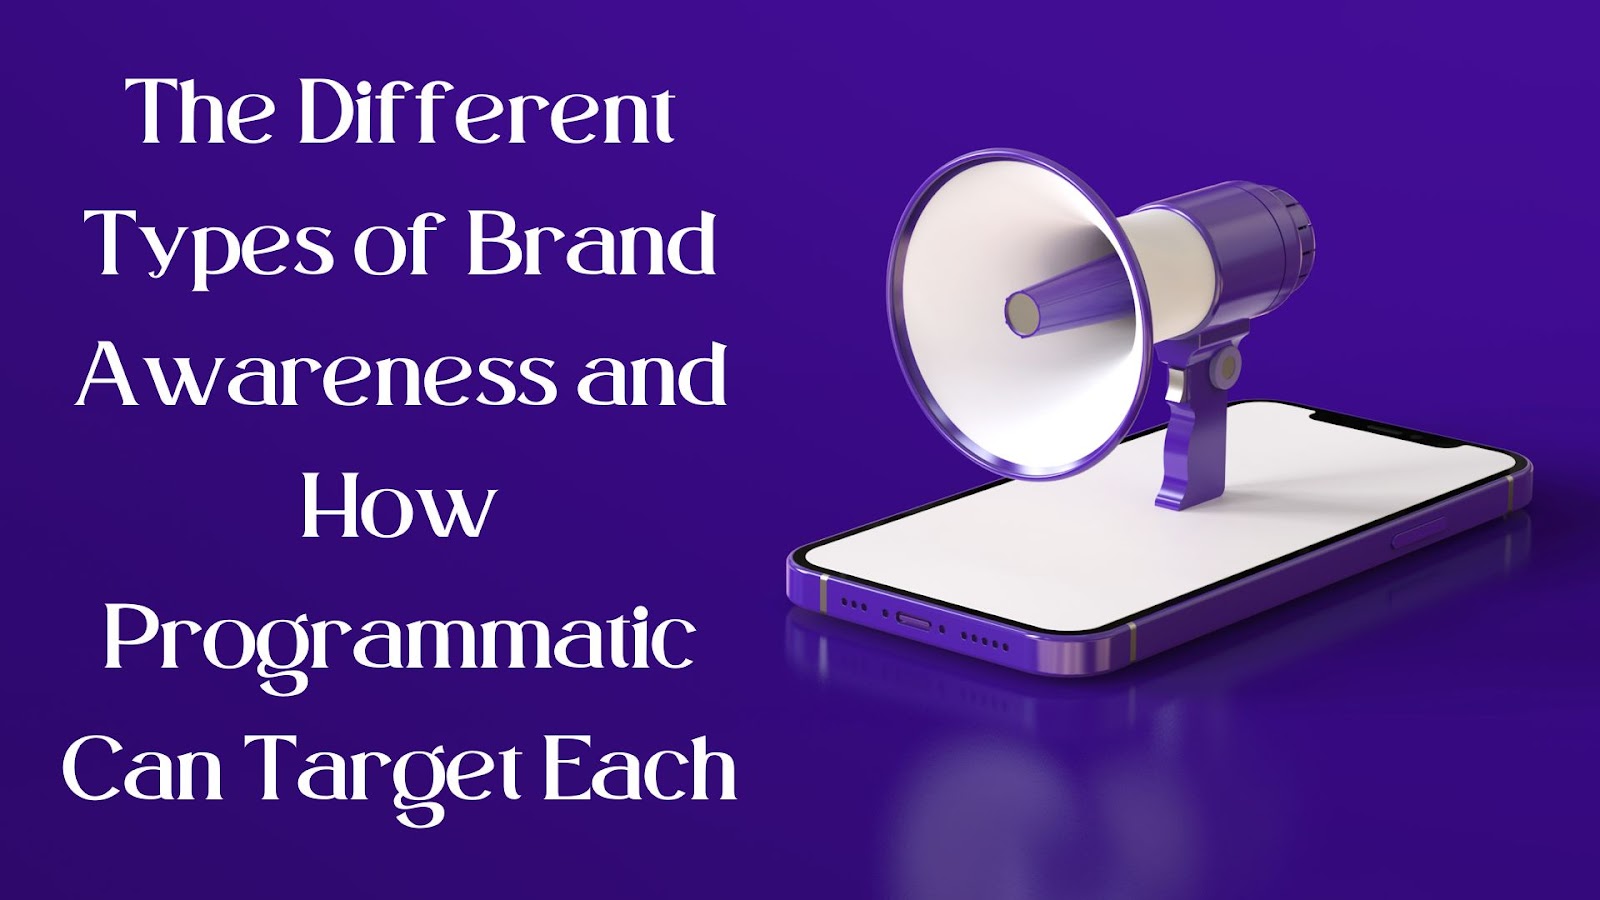 The Different Types of Brand Awareness and How Programmatic Can Target Each